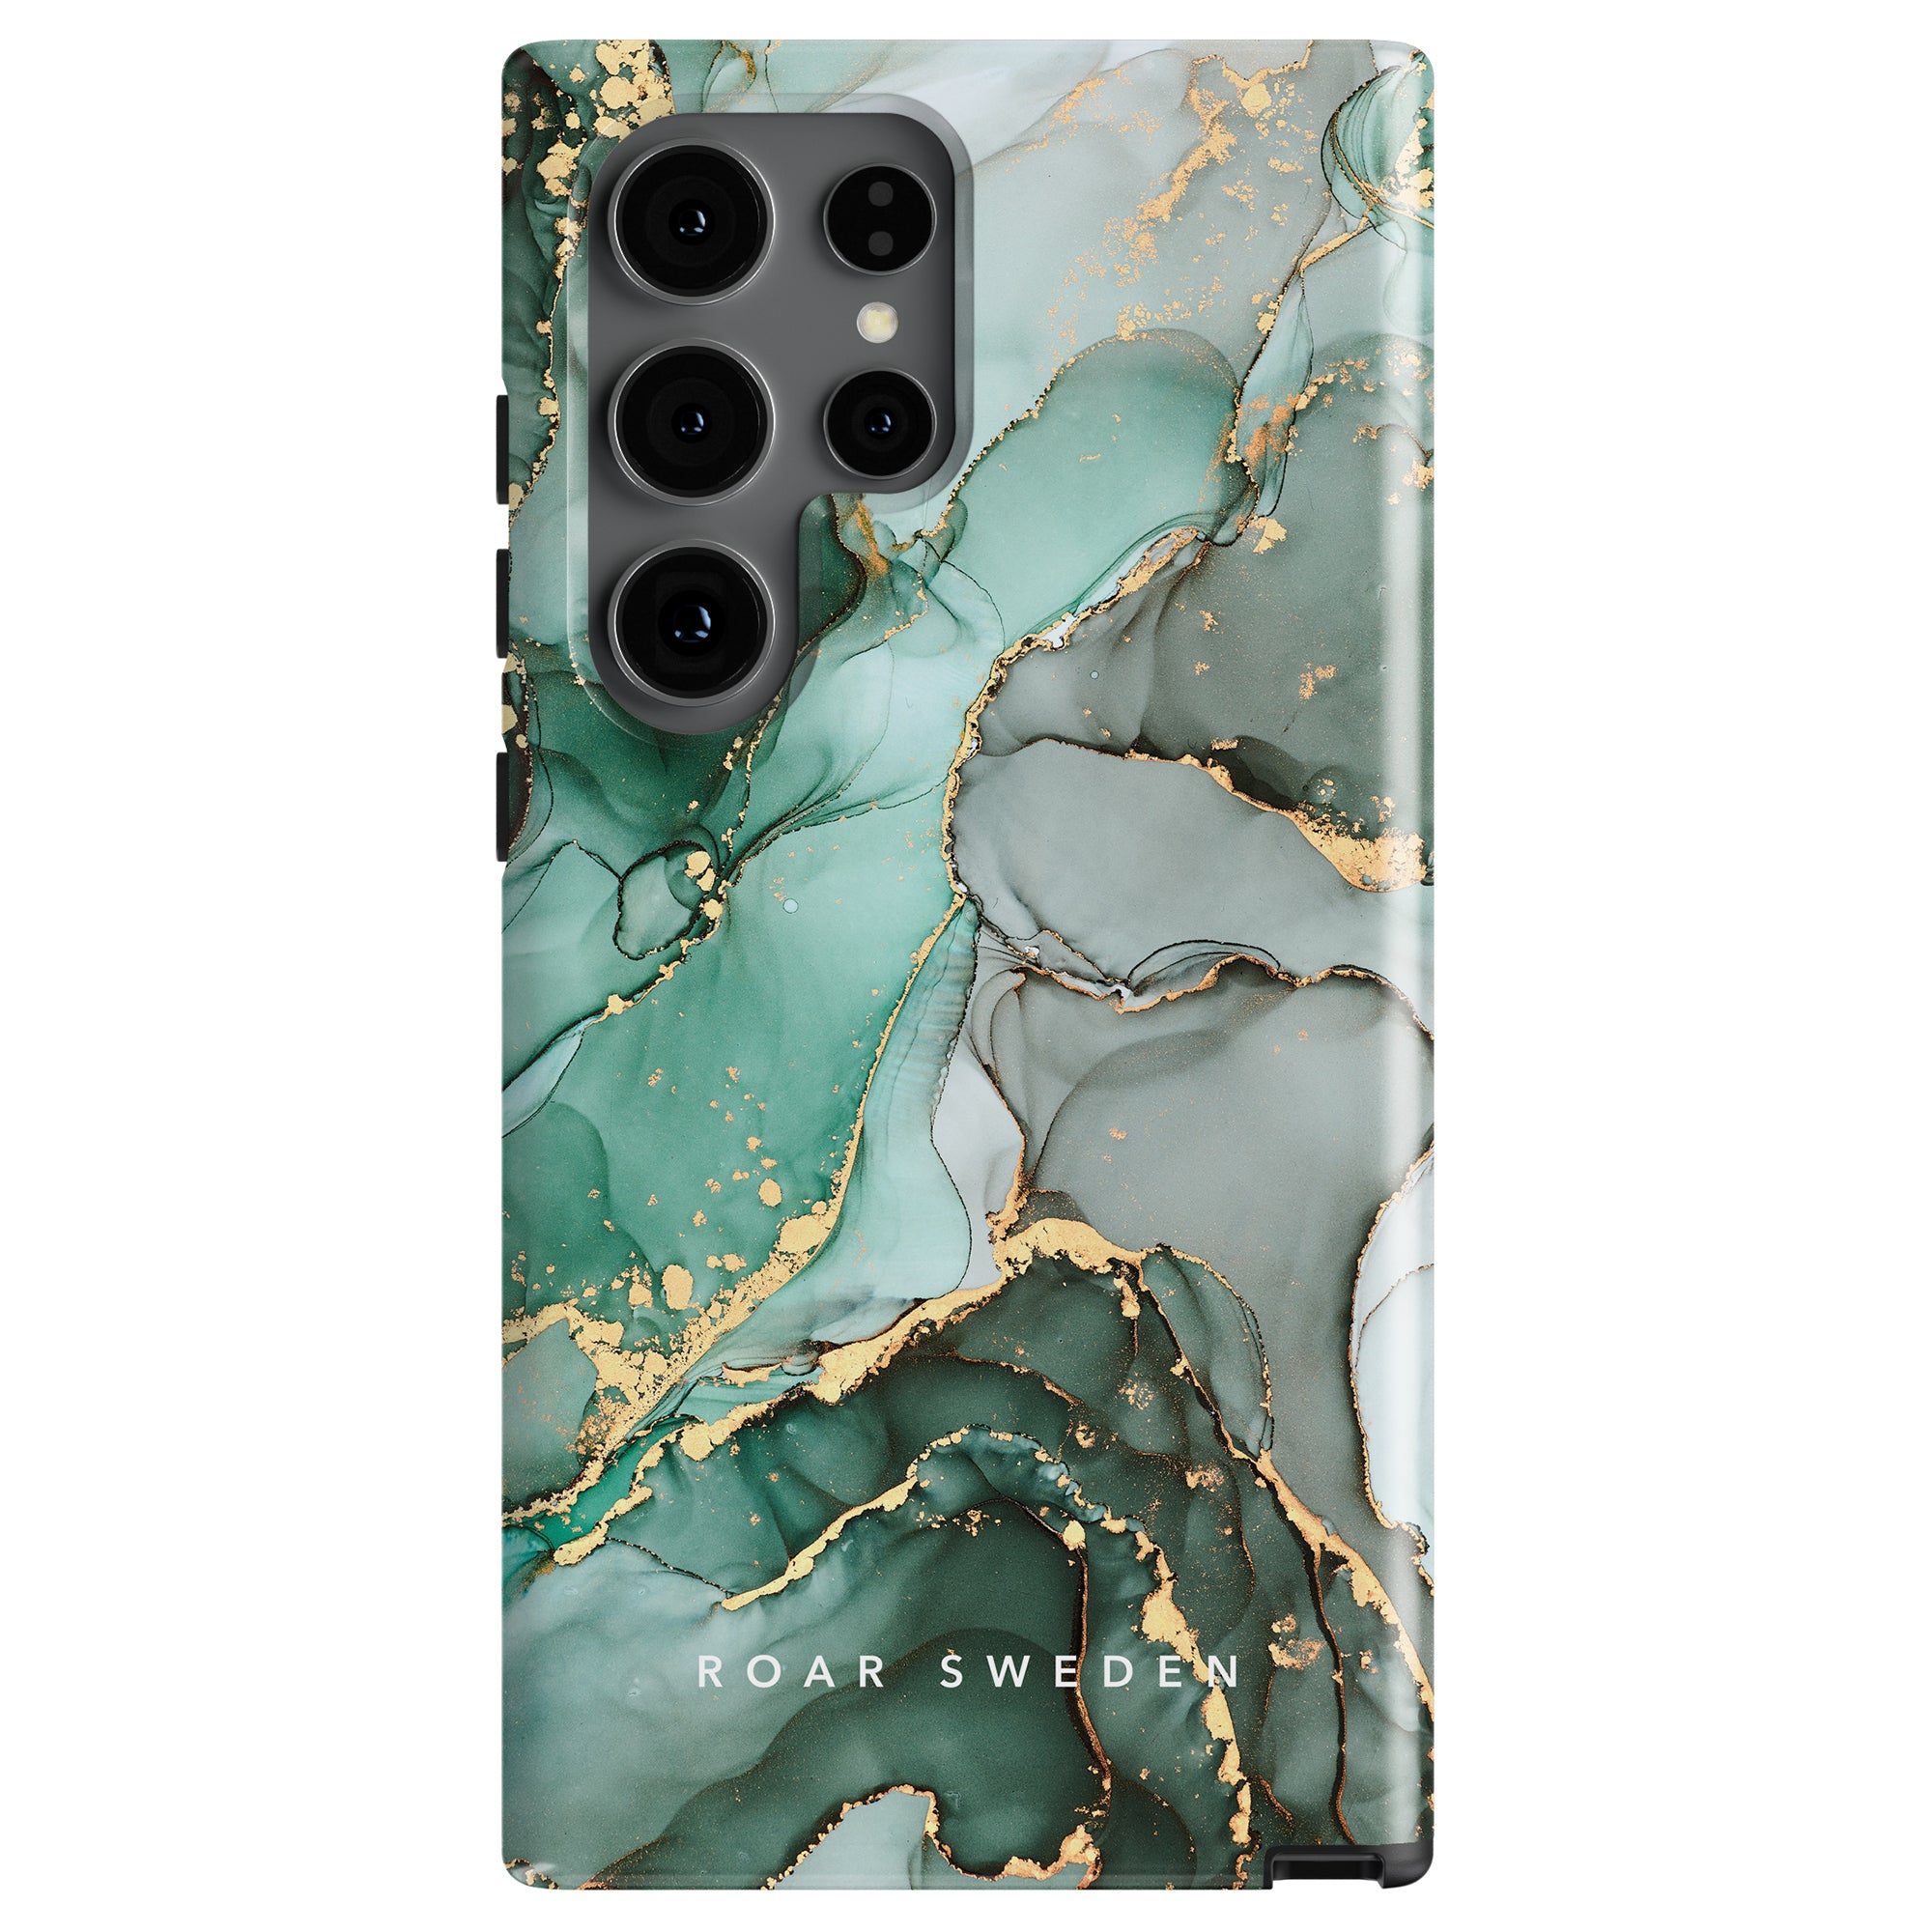 A smartphone case with a green and gold swirling marble design, featuring the brand name "ROAR SWEDEN" at the bottom. This Emerald - Tough case offers robust skydd while showcasing an elegant marmor design.